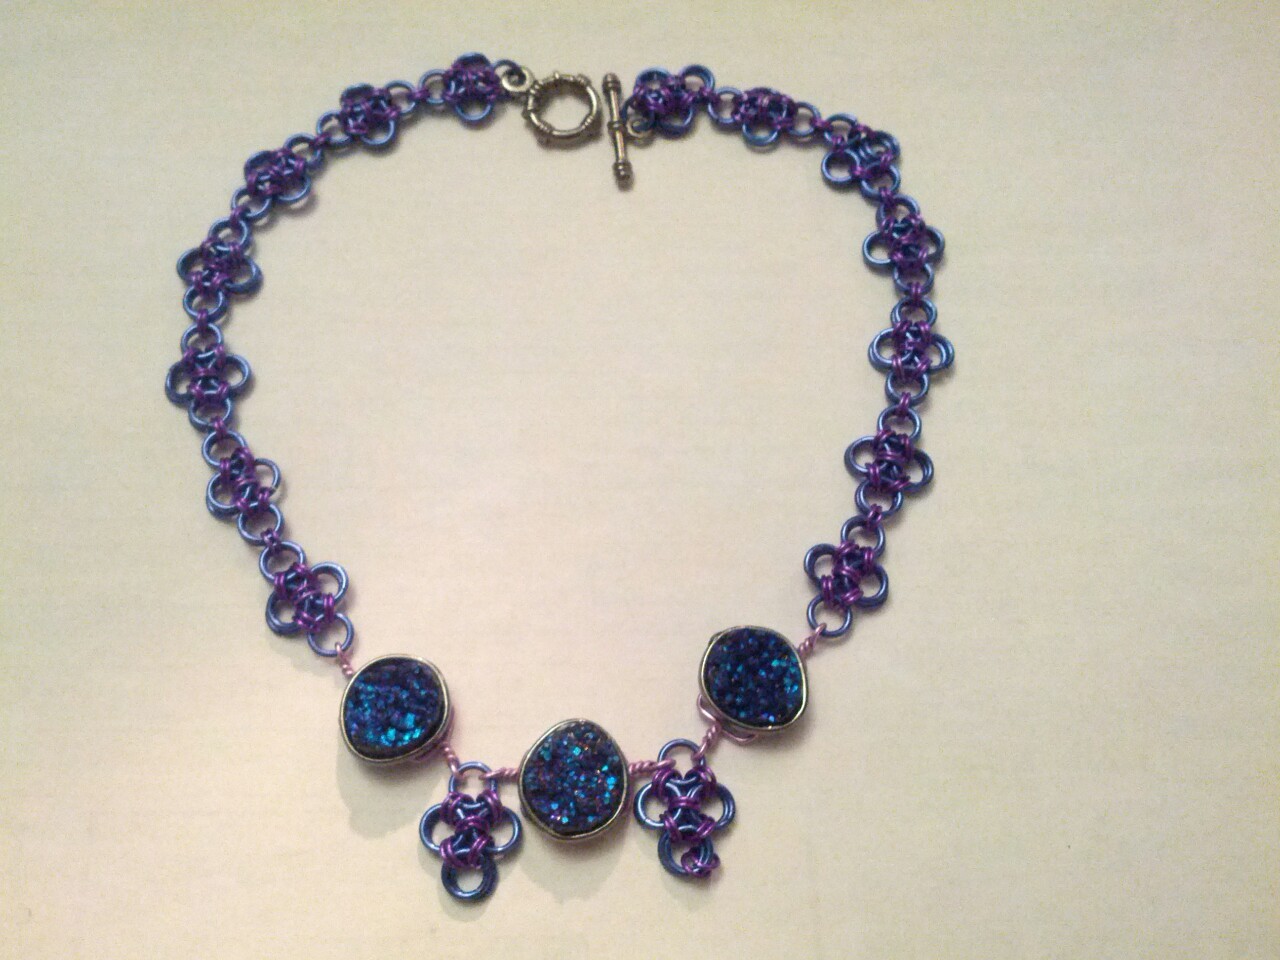 The necklace I&rsquo;ve been working on since I got home. I might change the